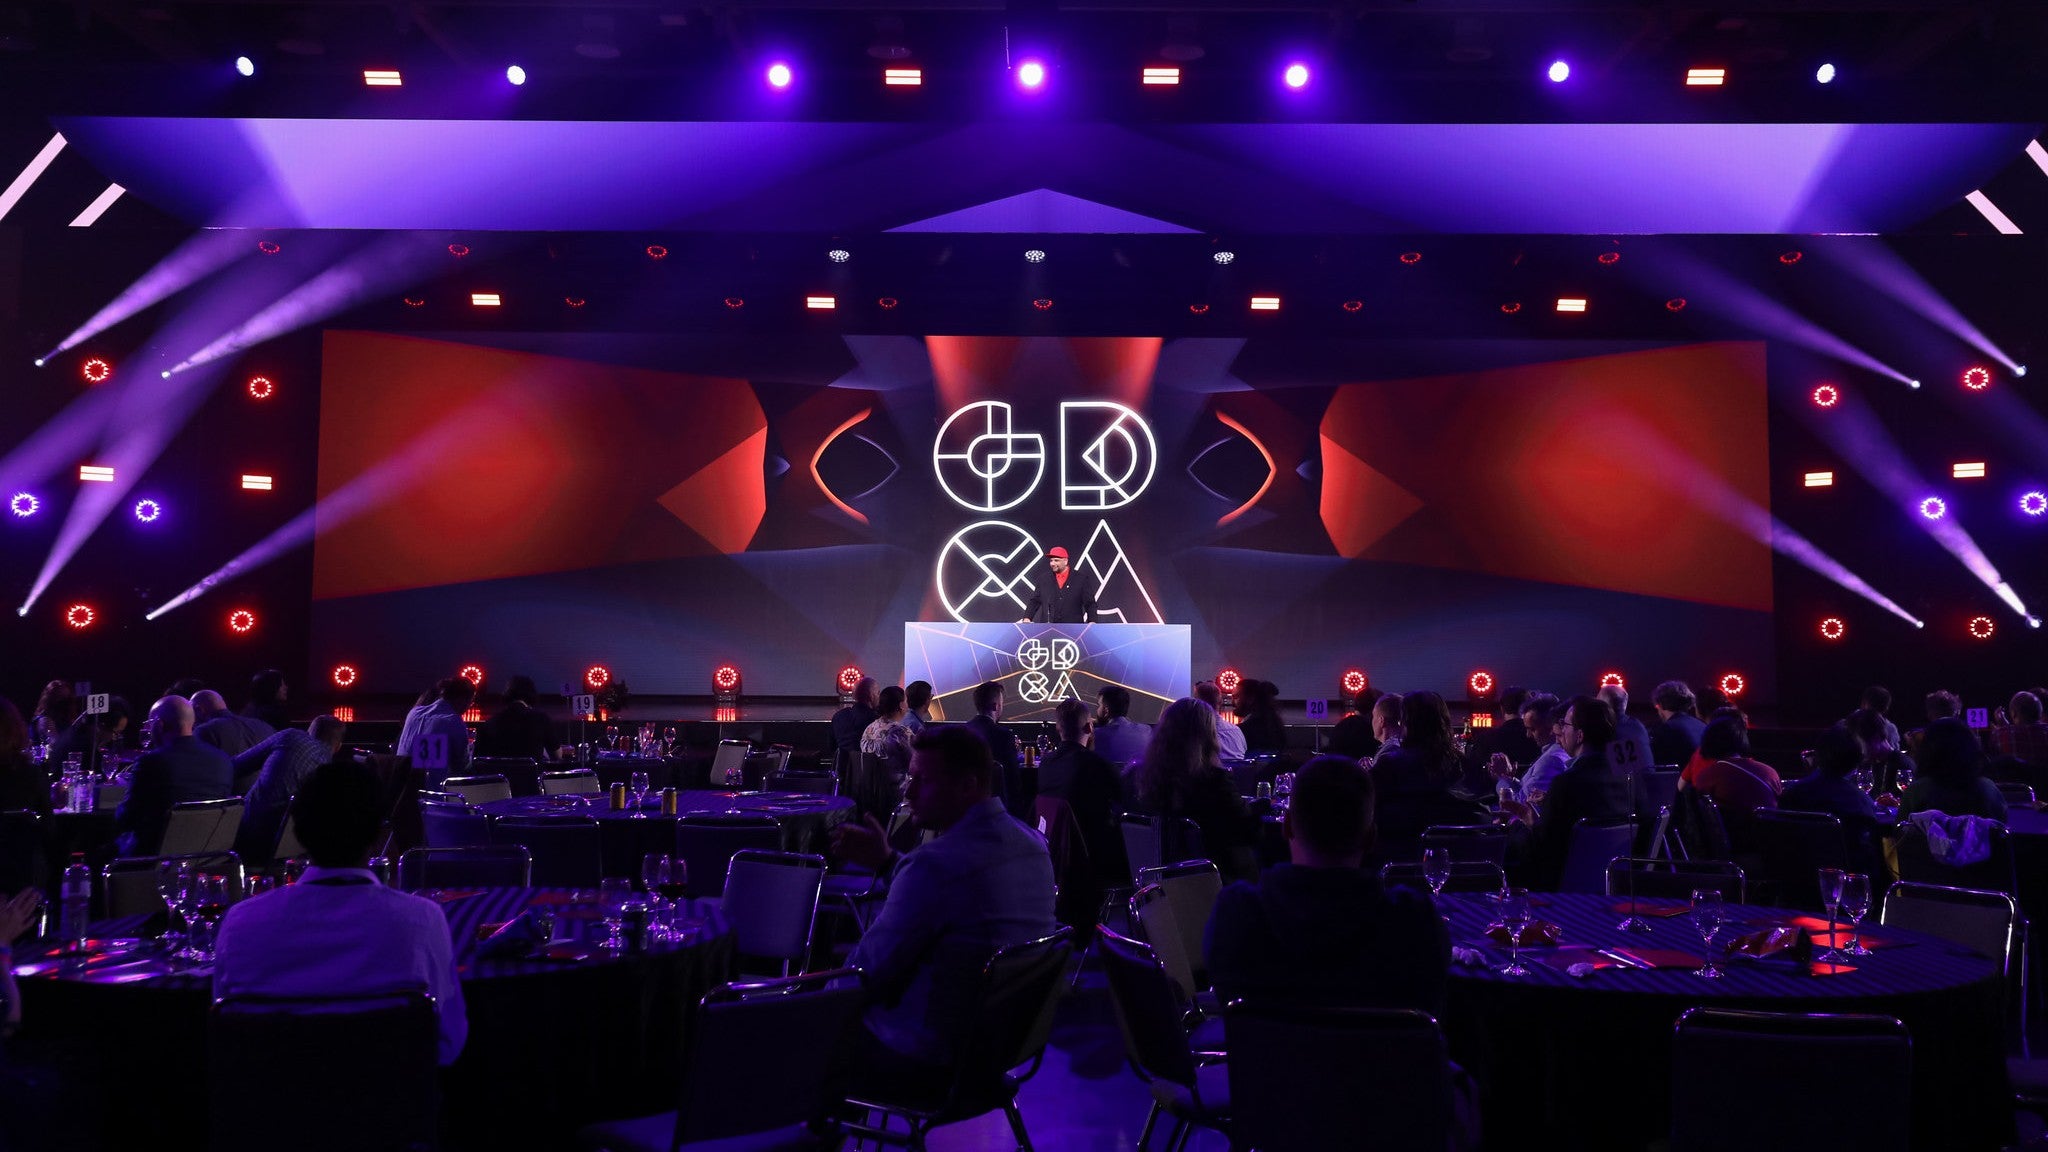 The stage of the 2022 Game Developers Choice Awards with the GDCA logo on the backdrop